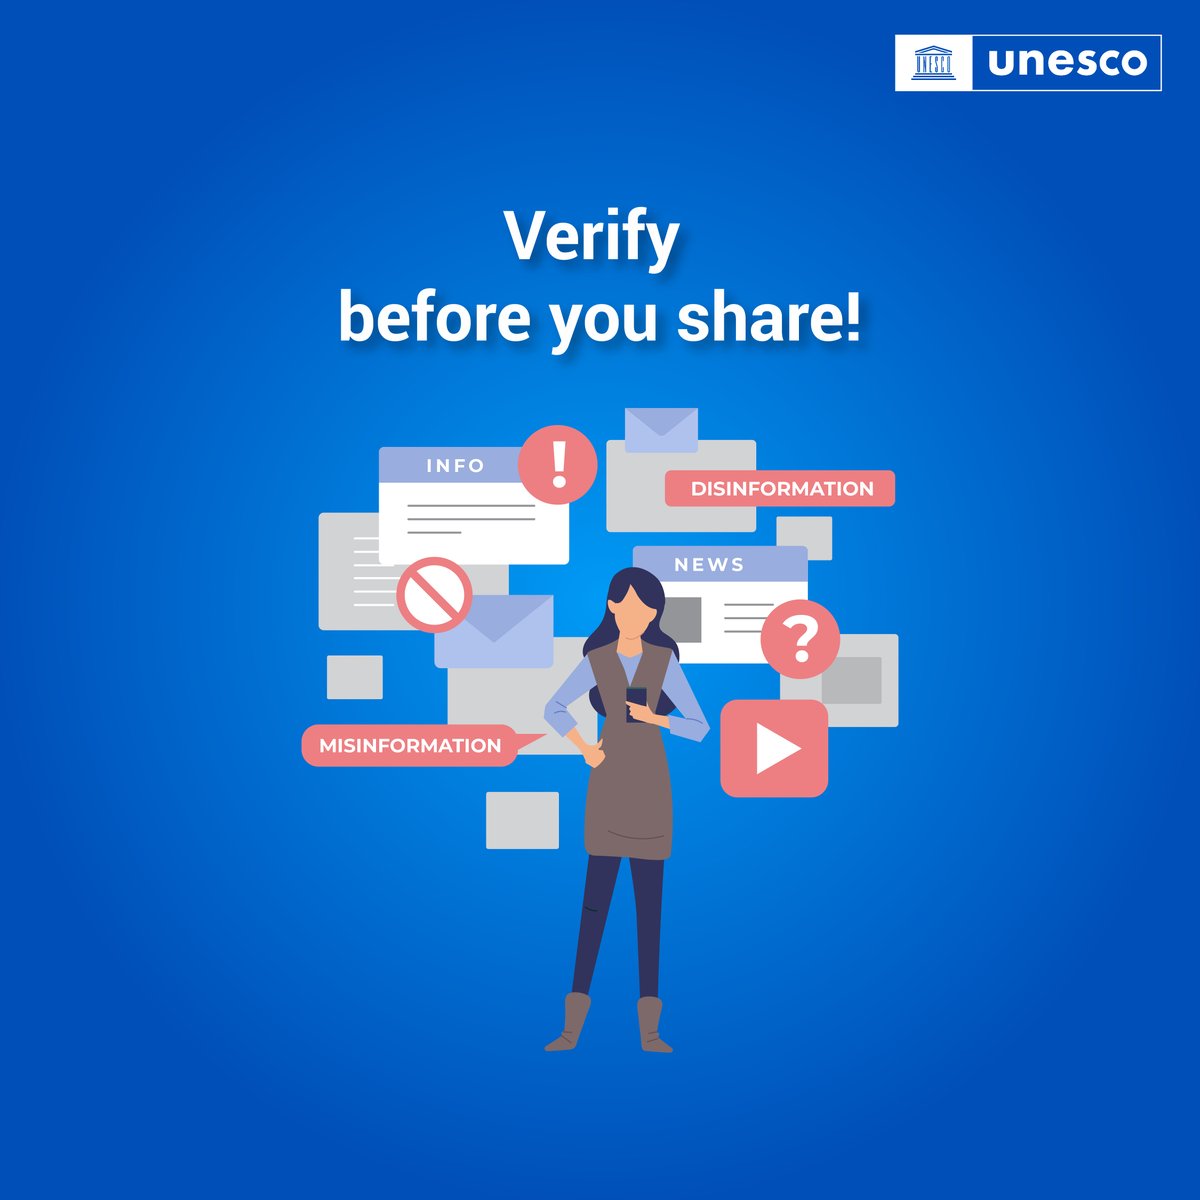 🚫 Stop the spread of disinformation! 🕵️‍♀️ Verify the information before you share! Together, we can combat cyberbullying and keep our online community safe and informed. en.unesco.org/themes/media-p… #ThinkBeforeSharing